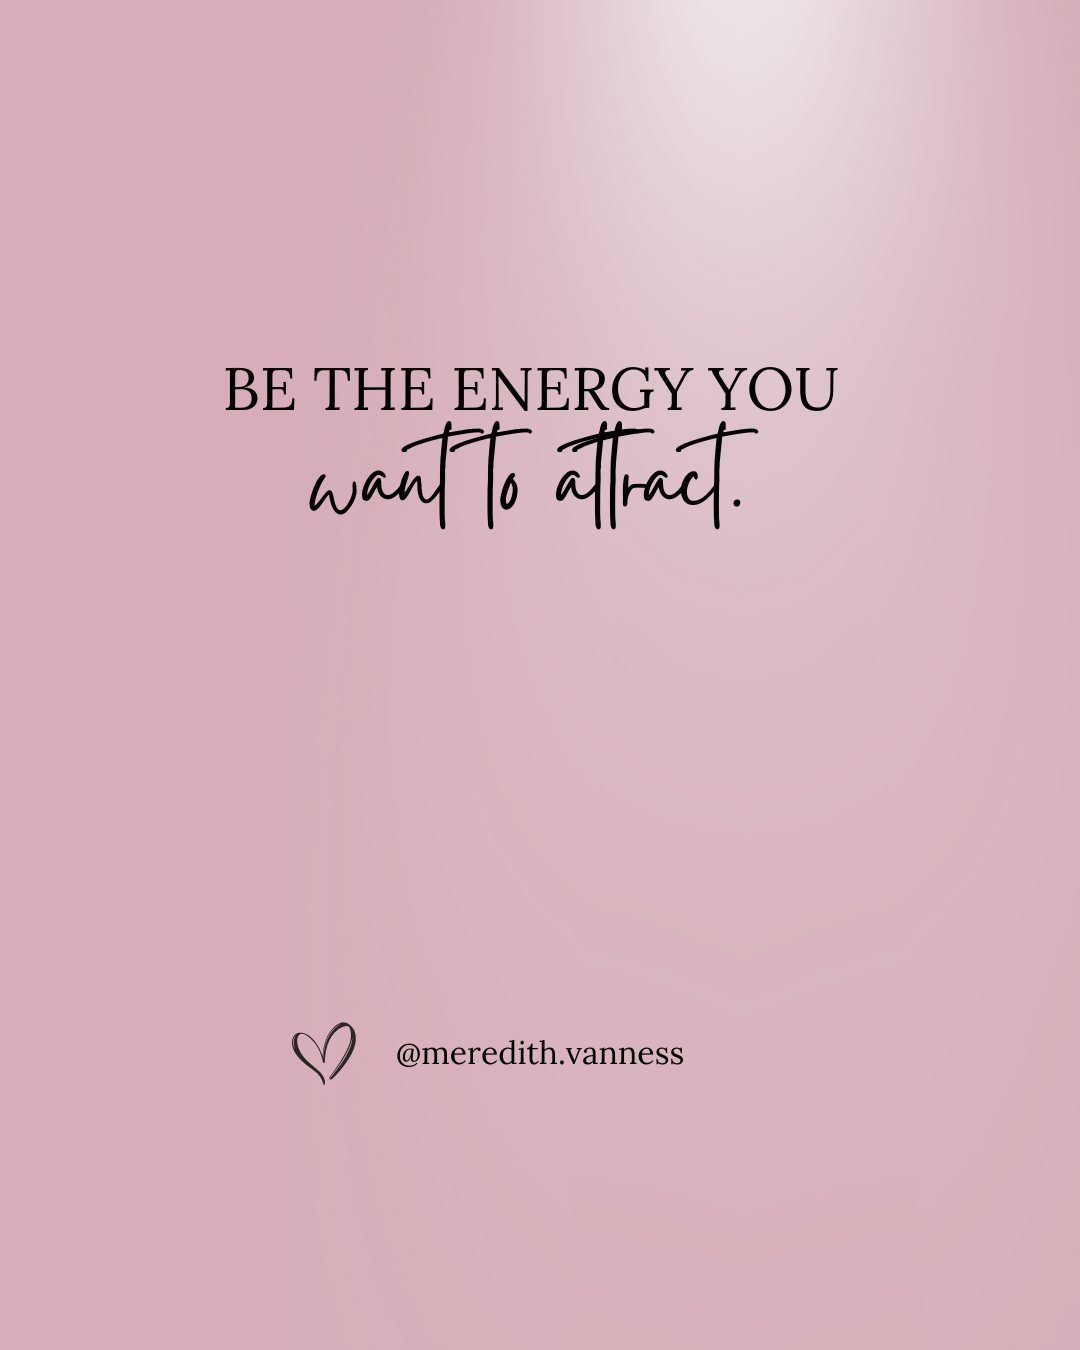 Today, let's focus on attracting the kind of energy we want to experience!⁠
⁠
The Law of Attraction tells us we project energy into the universe, and similar energy finds its way back to us.  Science even explores these connections between thoughts, 